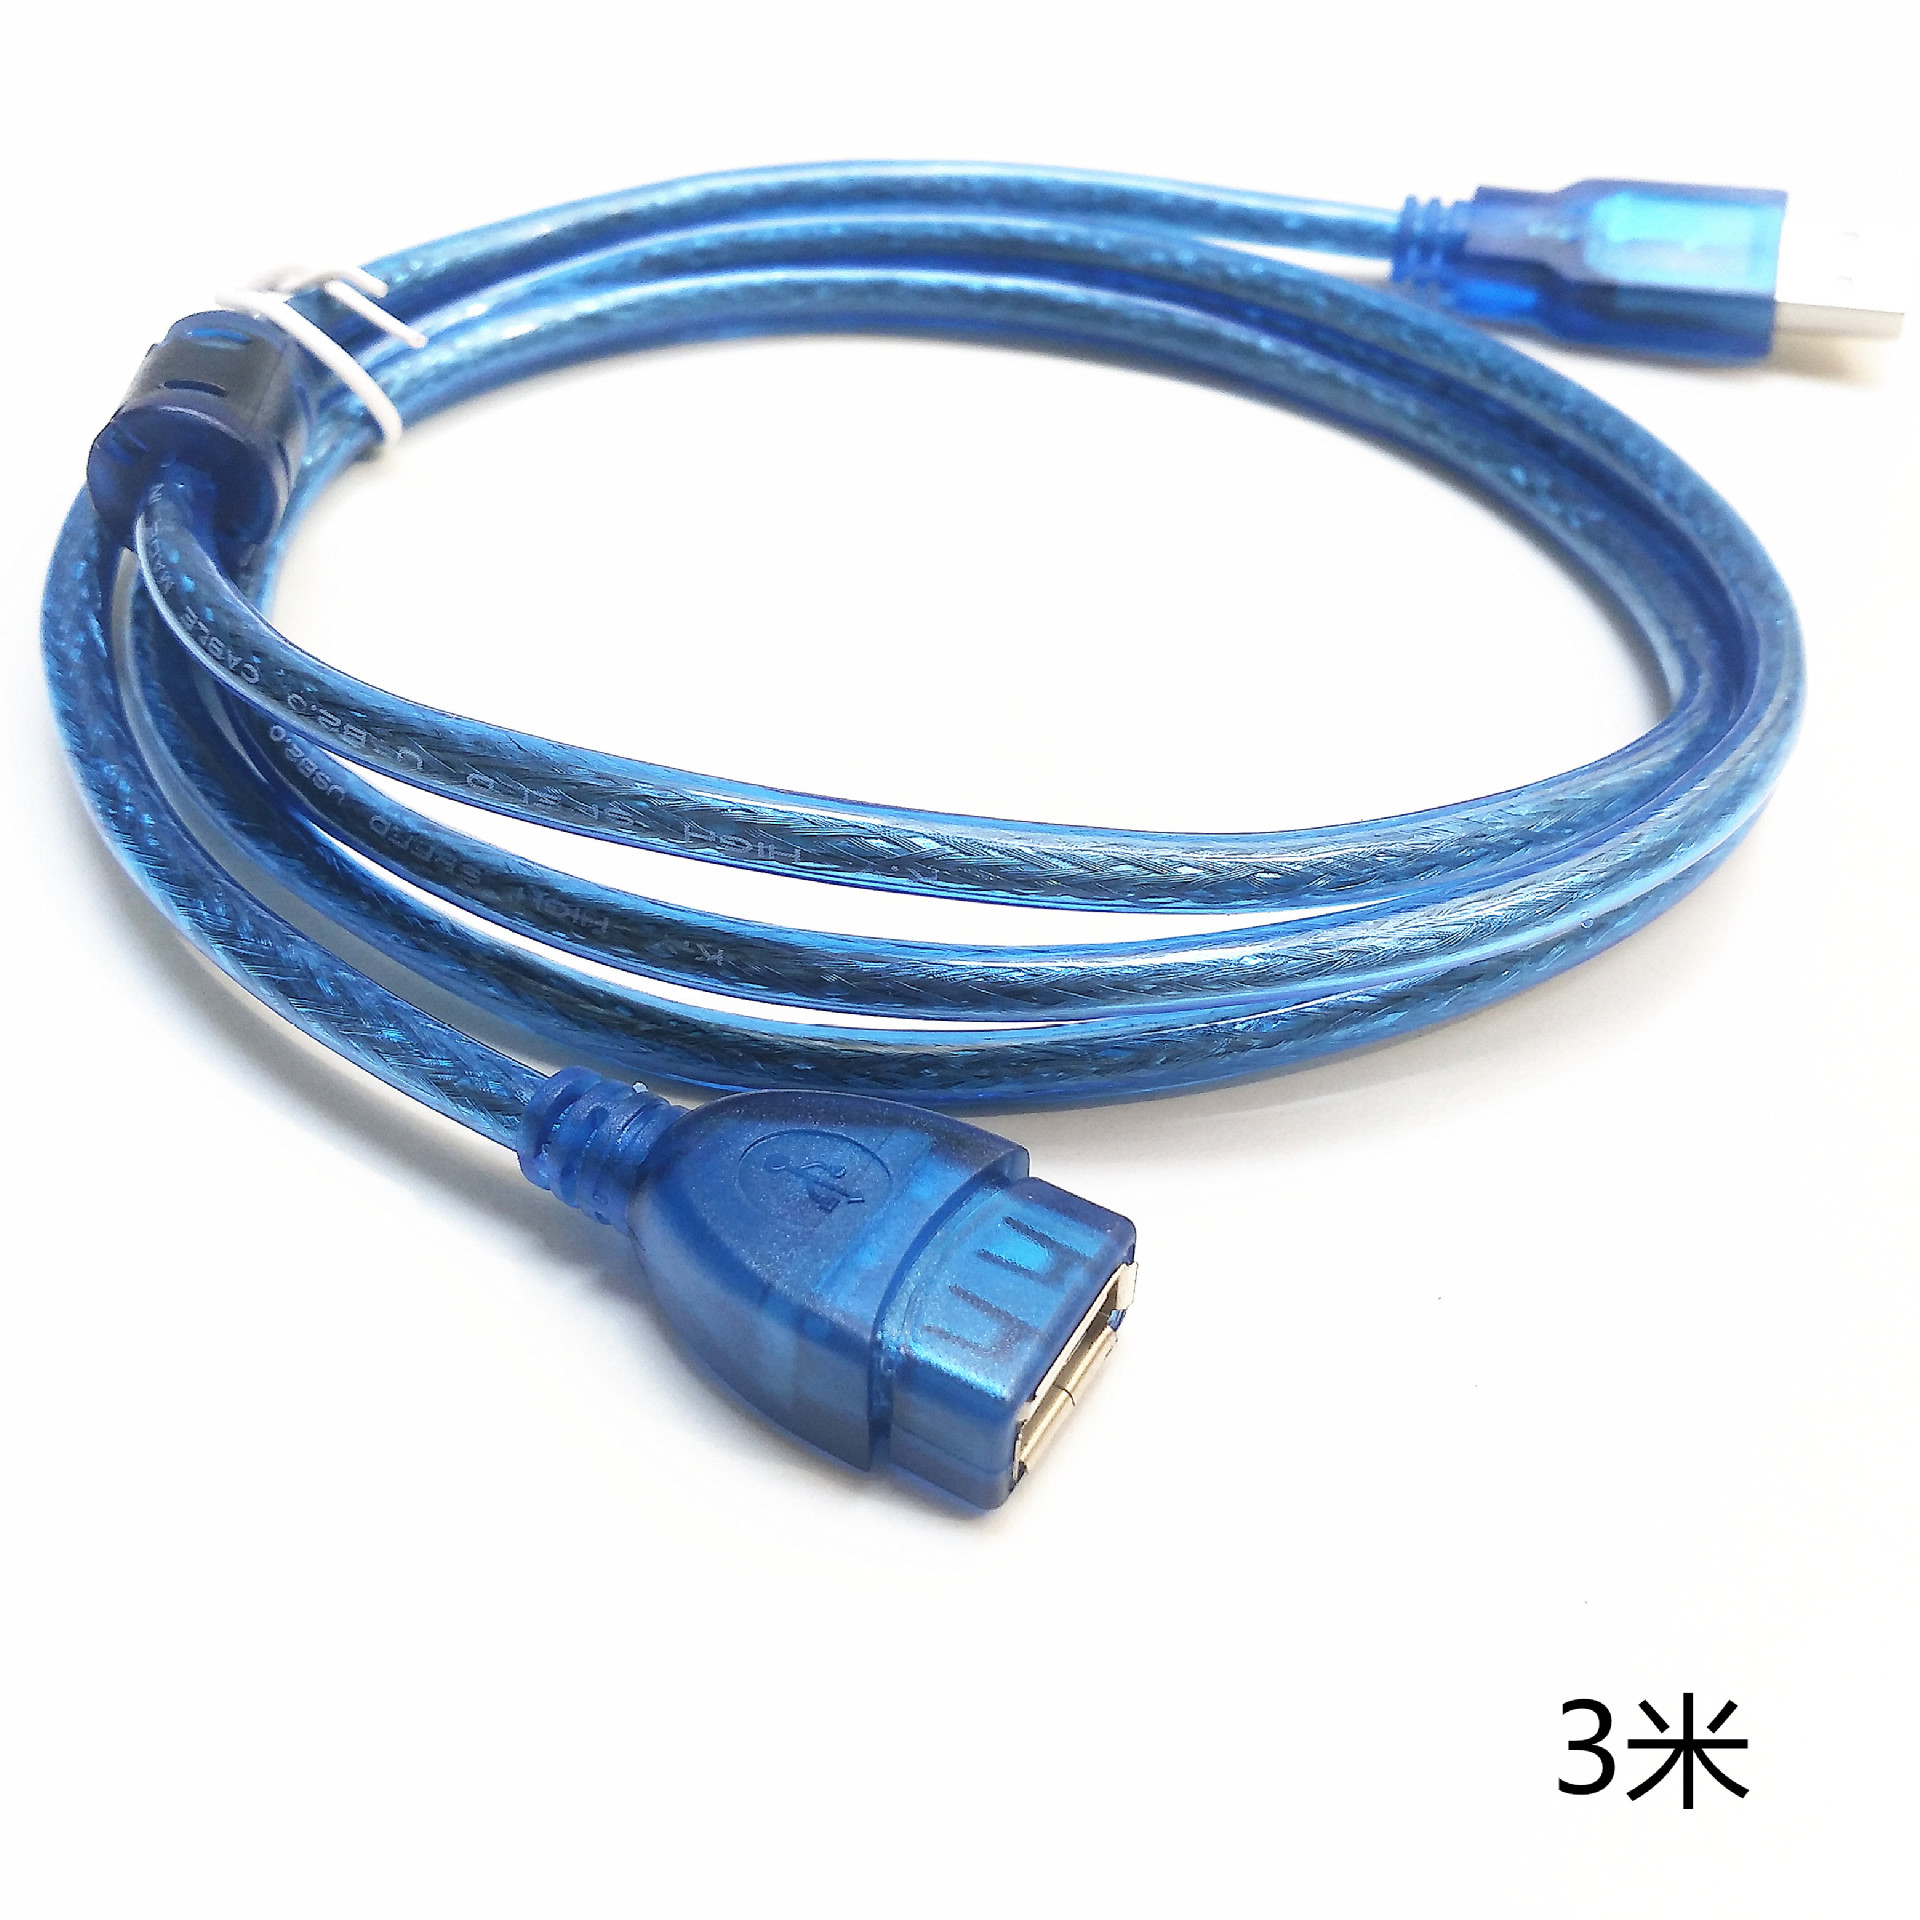 Blue USB extension cable Computer cable USB standard 2.0 data cable ...